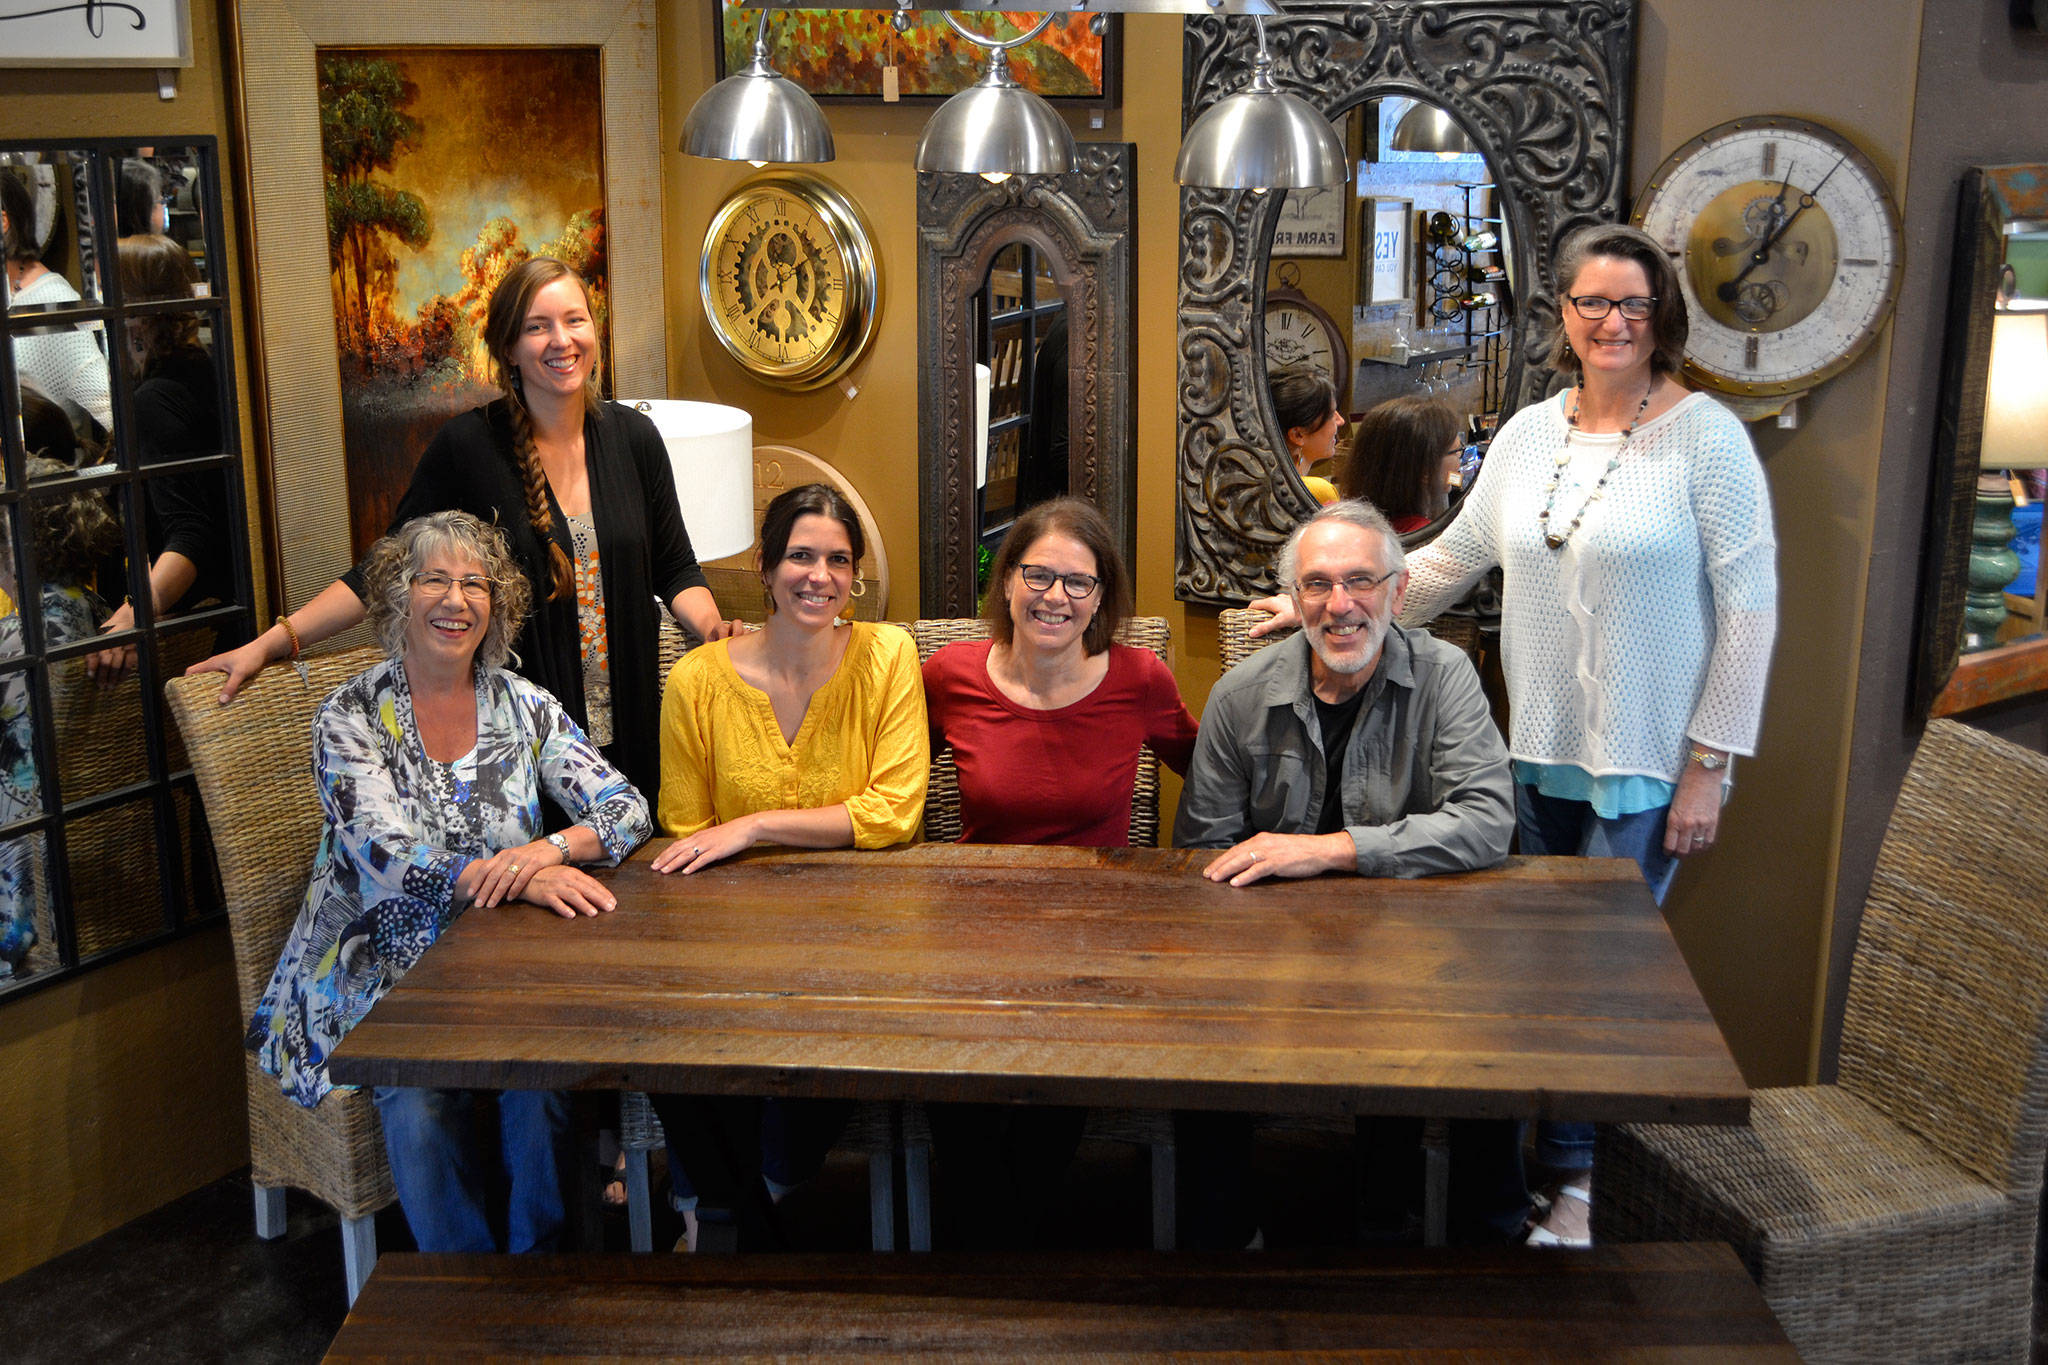 Jeri and Fran Sanford, fourth and fifth from left, recently listed their 20-year-old business, Over the Fence, for sale. They’ve offered home furnishings from around the world for more than 20 years. Staff for the store include, from left, Katy Nichols, Bergen Carey, Emily Underwood, Jeri and Fran Sanford, and Joanie May. Not pictured are Iris Edey, Cathy Lopes and Chris Biedermanngarde. (Matthew Nash/Olympic Peninsula News Group)